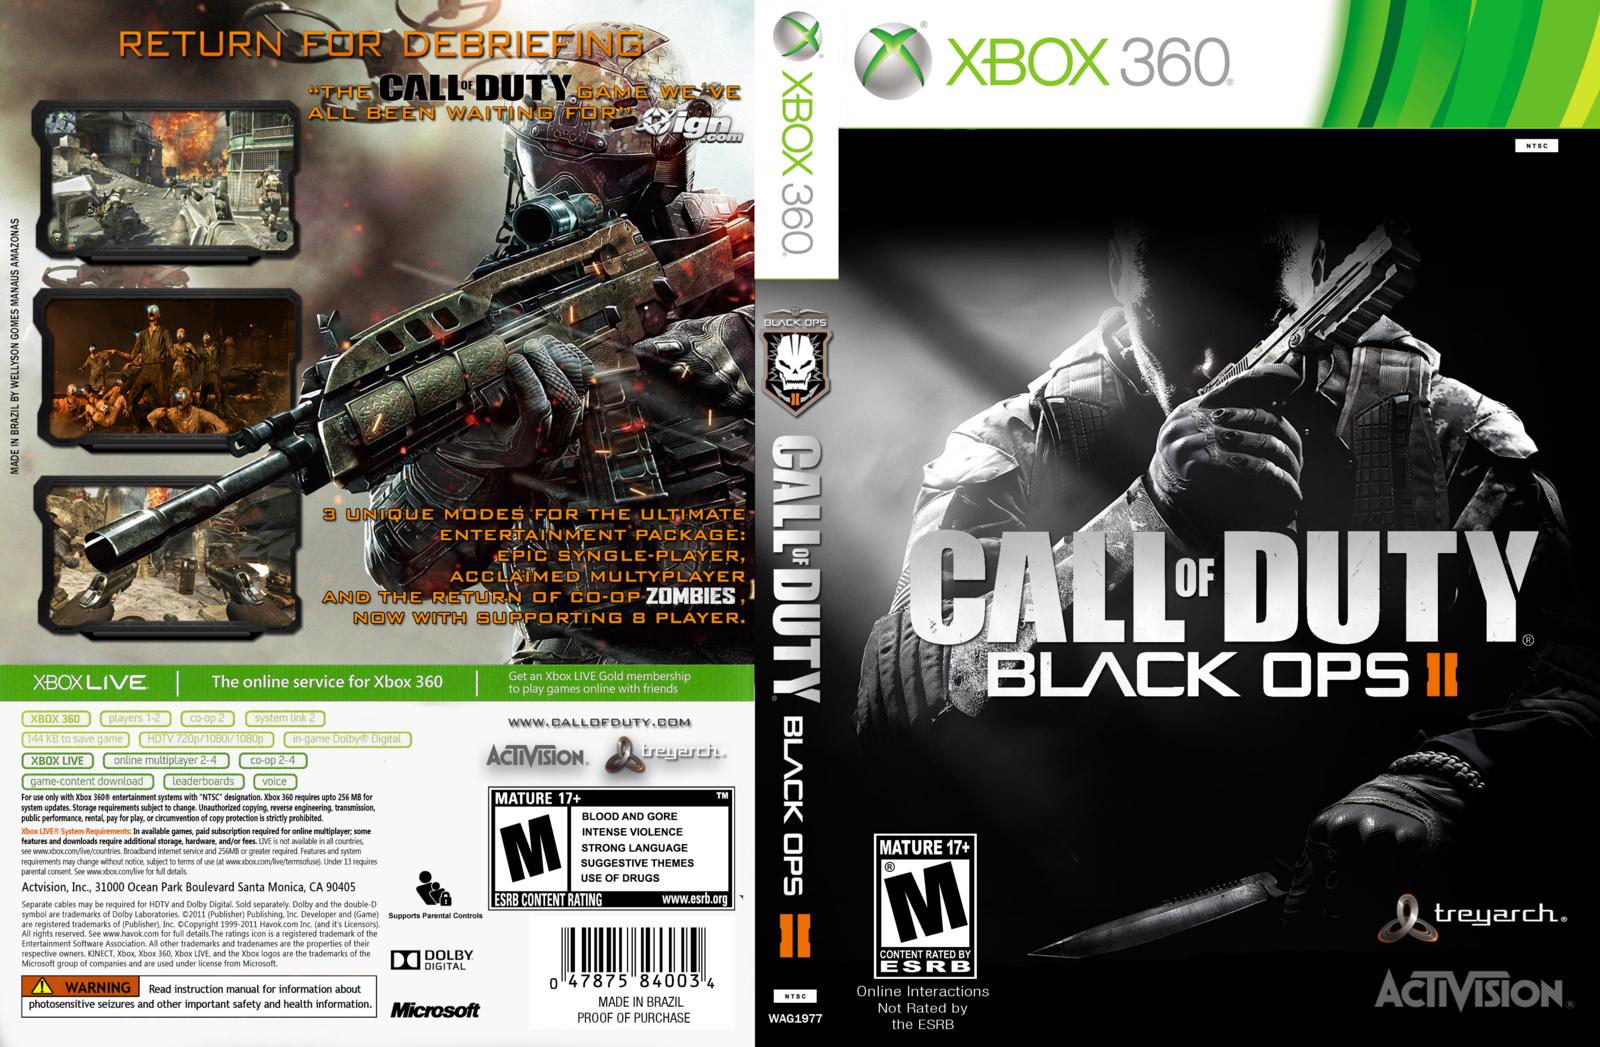 Call of duty xbox game. Cod Black ops 2 обложка Xbox 360. Black ops Xbox 360. Black ops Xbox 360 обложка. Call of Duty Black ops II Xbox 360 обложка.